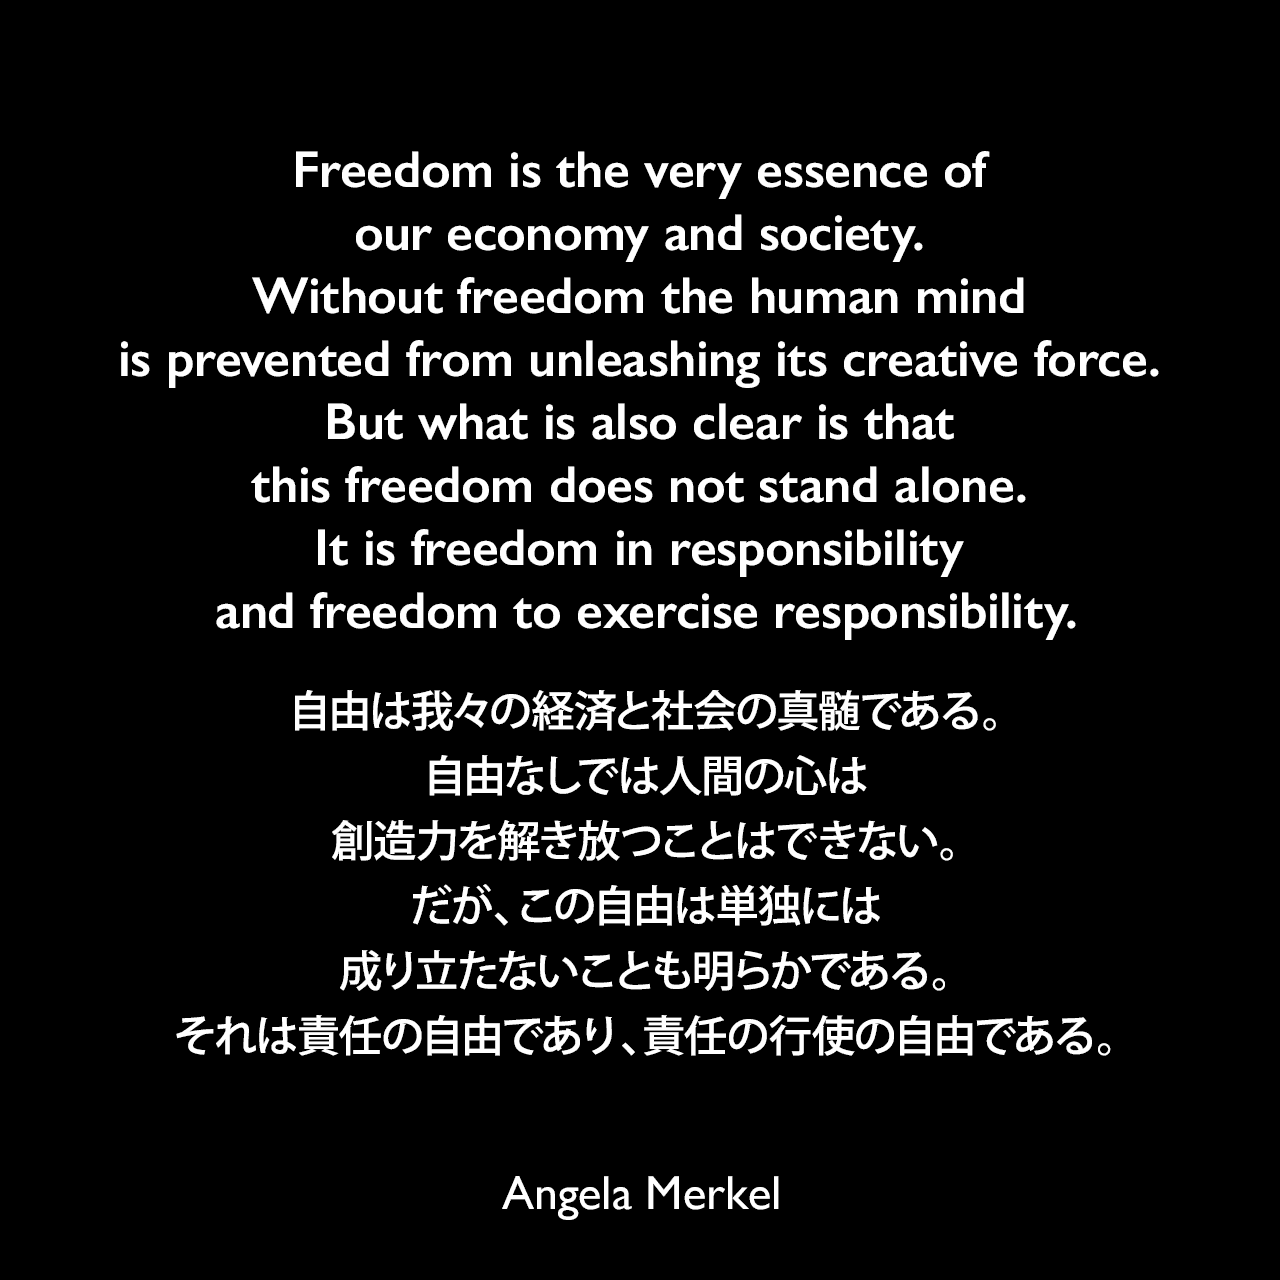 Freedom is the very essence of our economy and society. Without freedom the human mind is prevented from unleashing its creative force. But what is also clear is that this freedom does not stand alone. It is freedom in responsibility and freedom to exercise responsibility.自由は我々の経済と社会の真髄である。自由なしでは人間の心は創造力を解き放つことはできない。だが、この自由は単独には成り立たないことも明らかである。それは責任の自由であり、責任の行使の自由である。- 2009年11月4日、国会の合同会議前の発言よりAngela Merkel